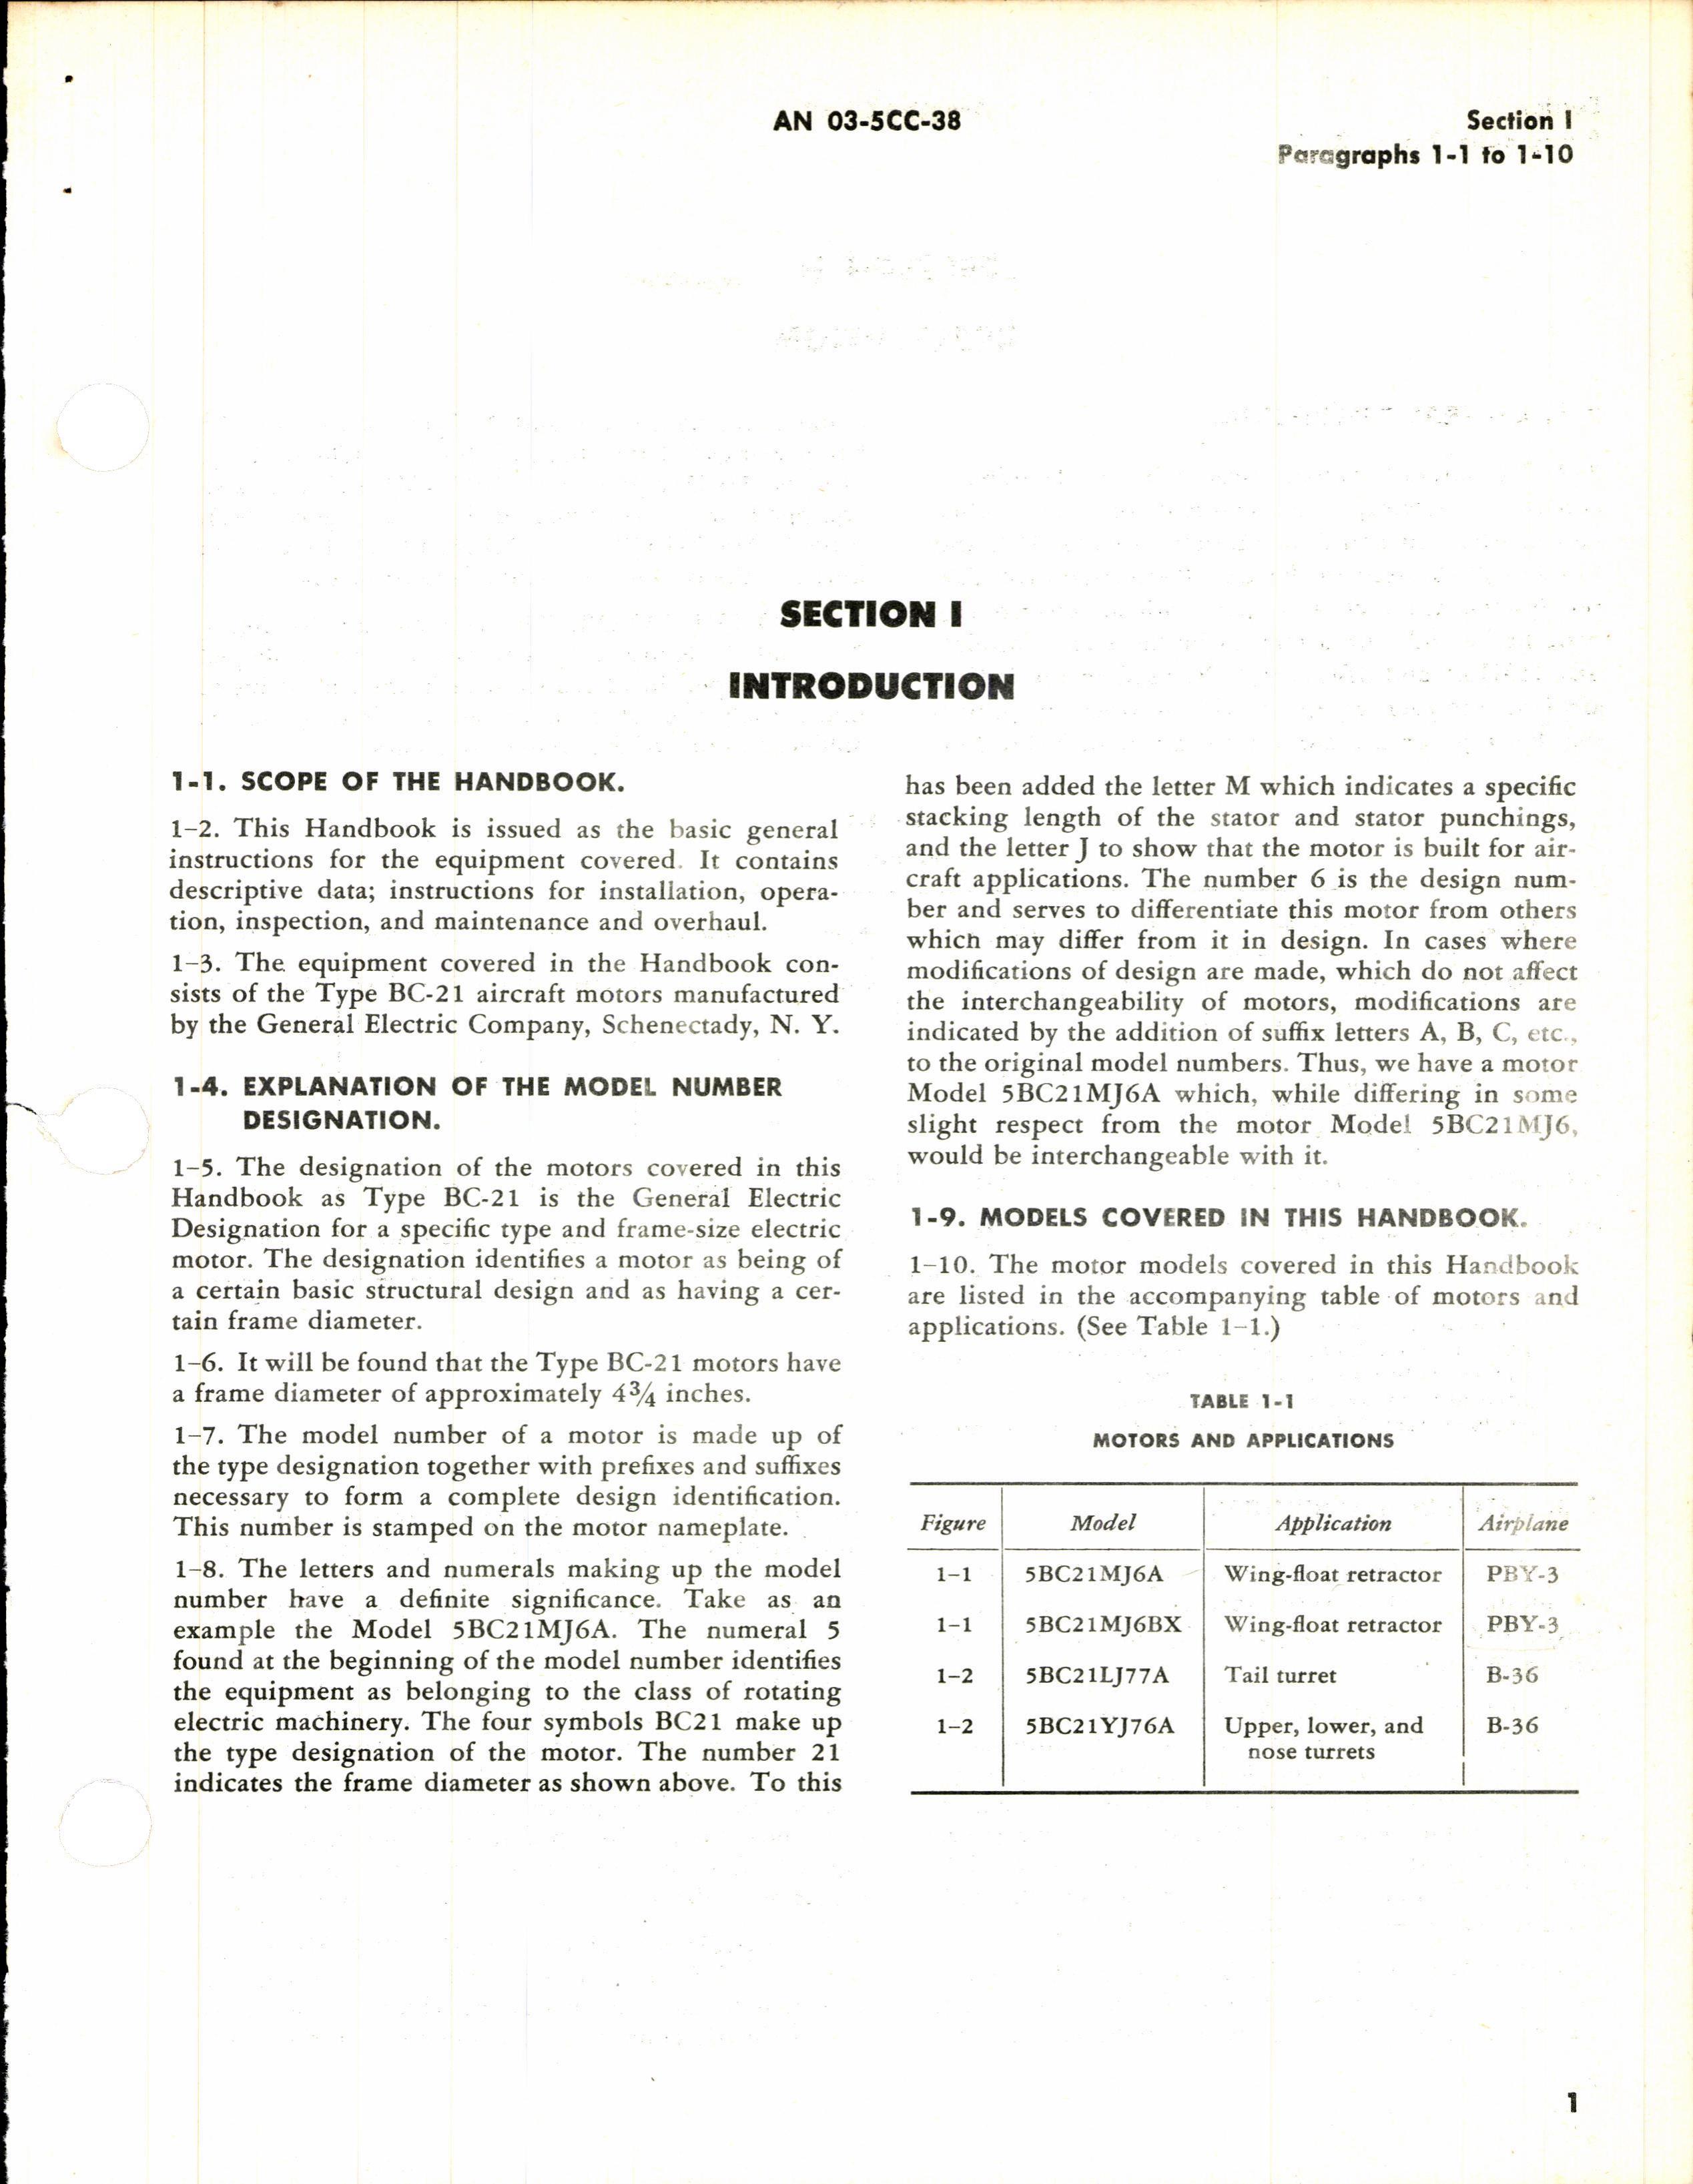 Sample page 5 from AirCorps Library document: Overhaul Instructions for Aircraft Motors Series 5BC21